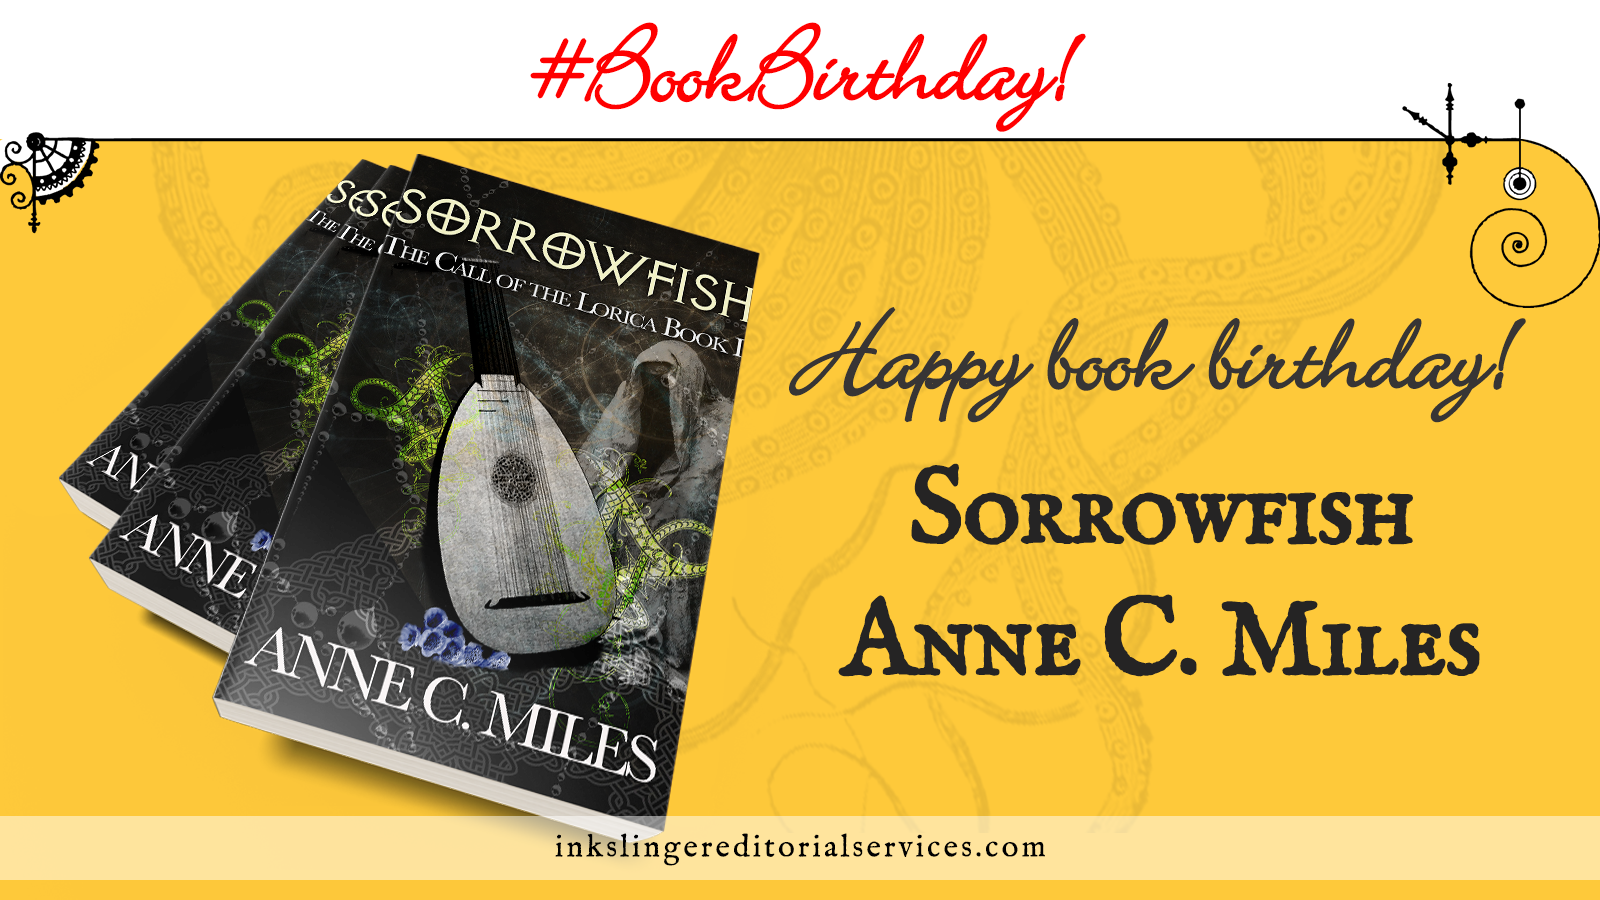 #BookBirthday! Happy book birthday to Anne C. Miles. Three Sorrowfish, The Call of the Lorica Book 1 books stacked on top of each other on a yellow background and faint tentacles.